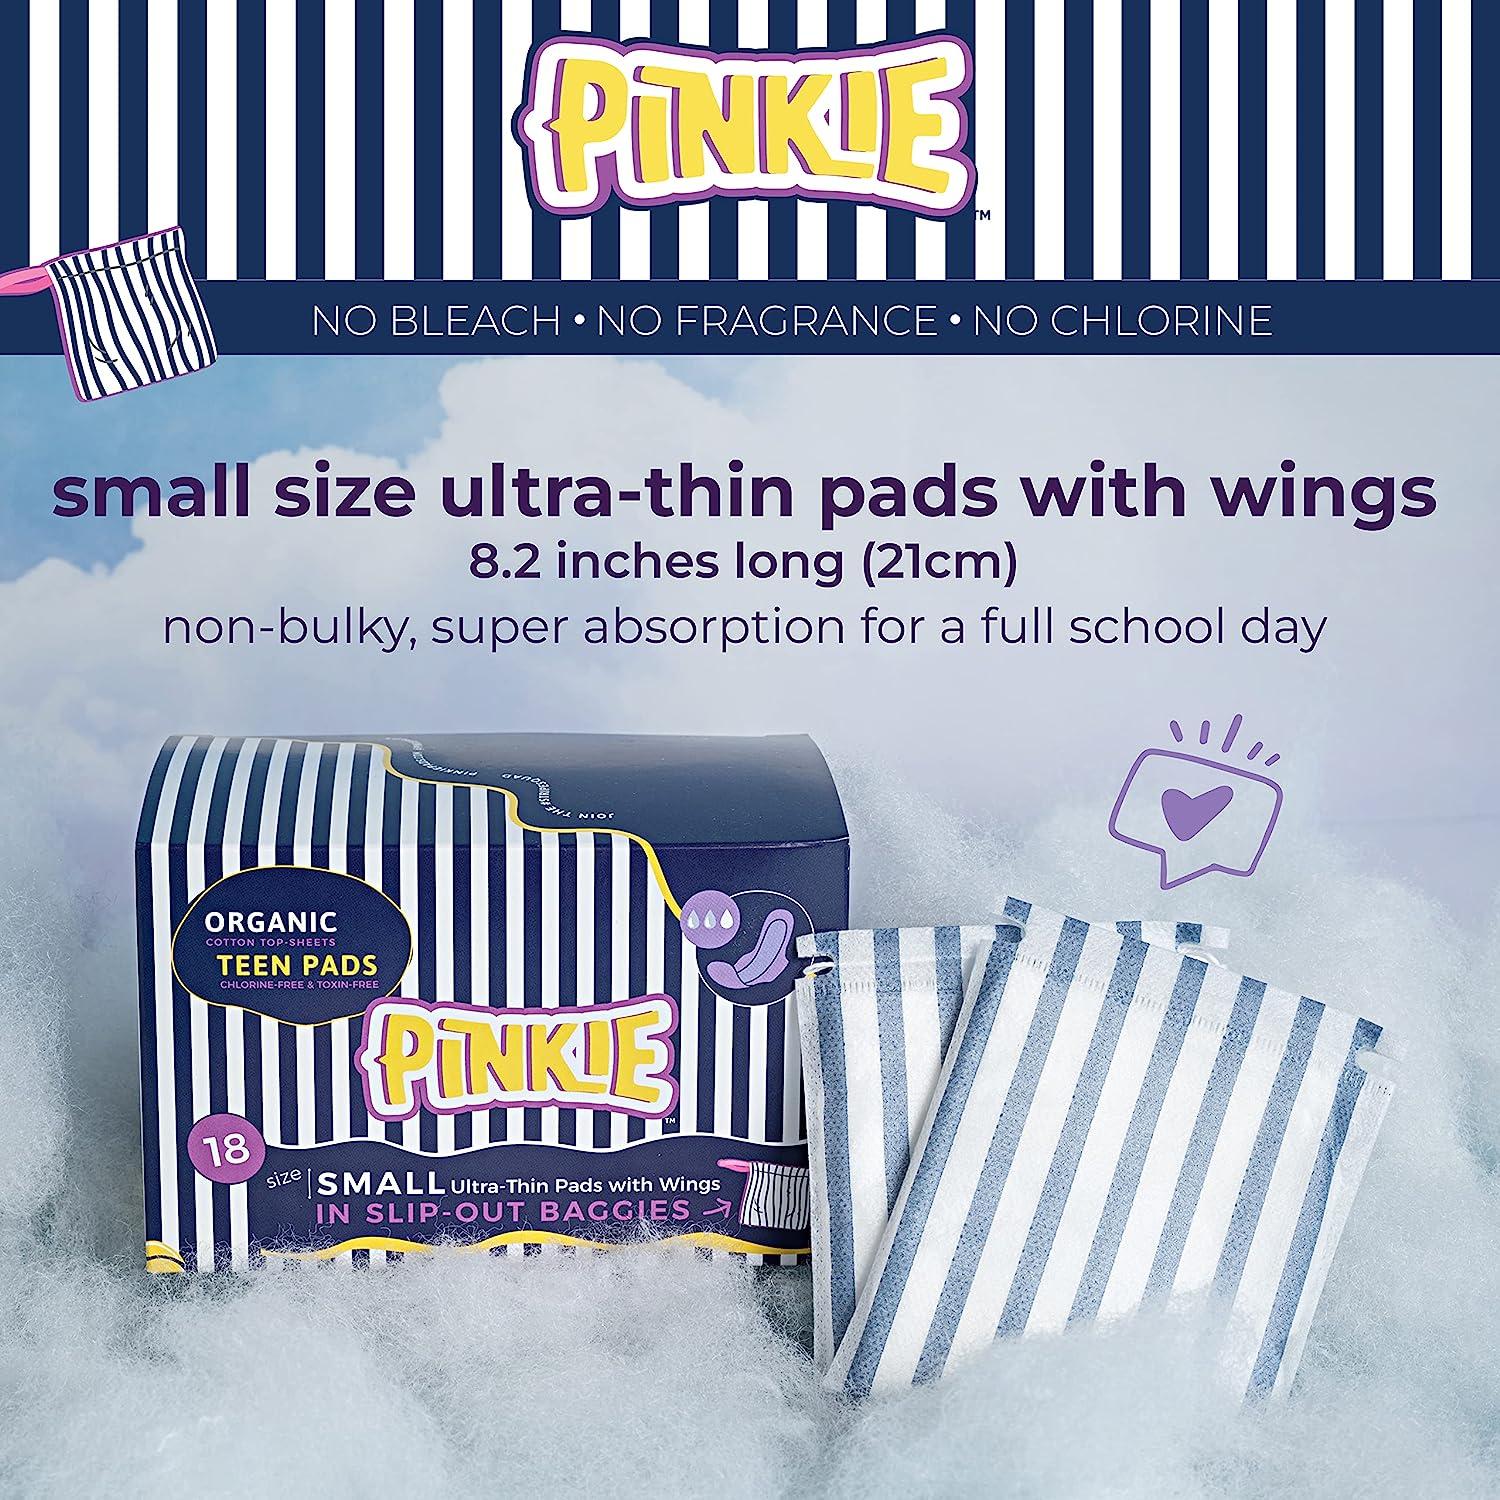 Pinkie Period Pads for Tweens & Teens - Designed for Smaller Underwear -  Organic Cotton Topsheet Teen Pads with Wings - Bleach Free & Chlorine Free  - Teen Small, 18 Count